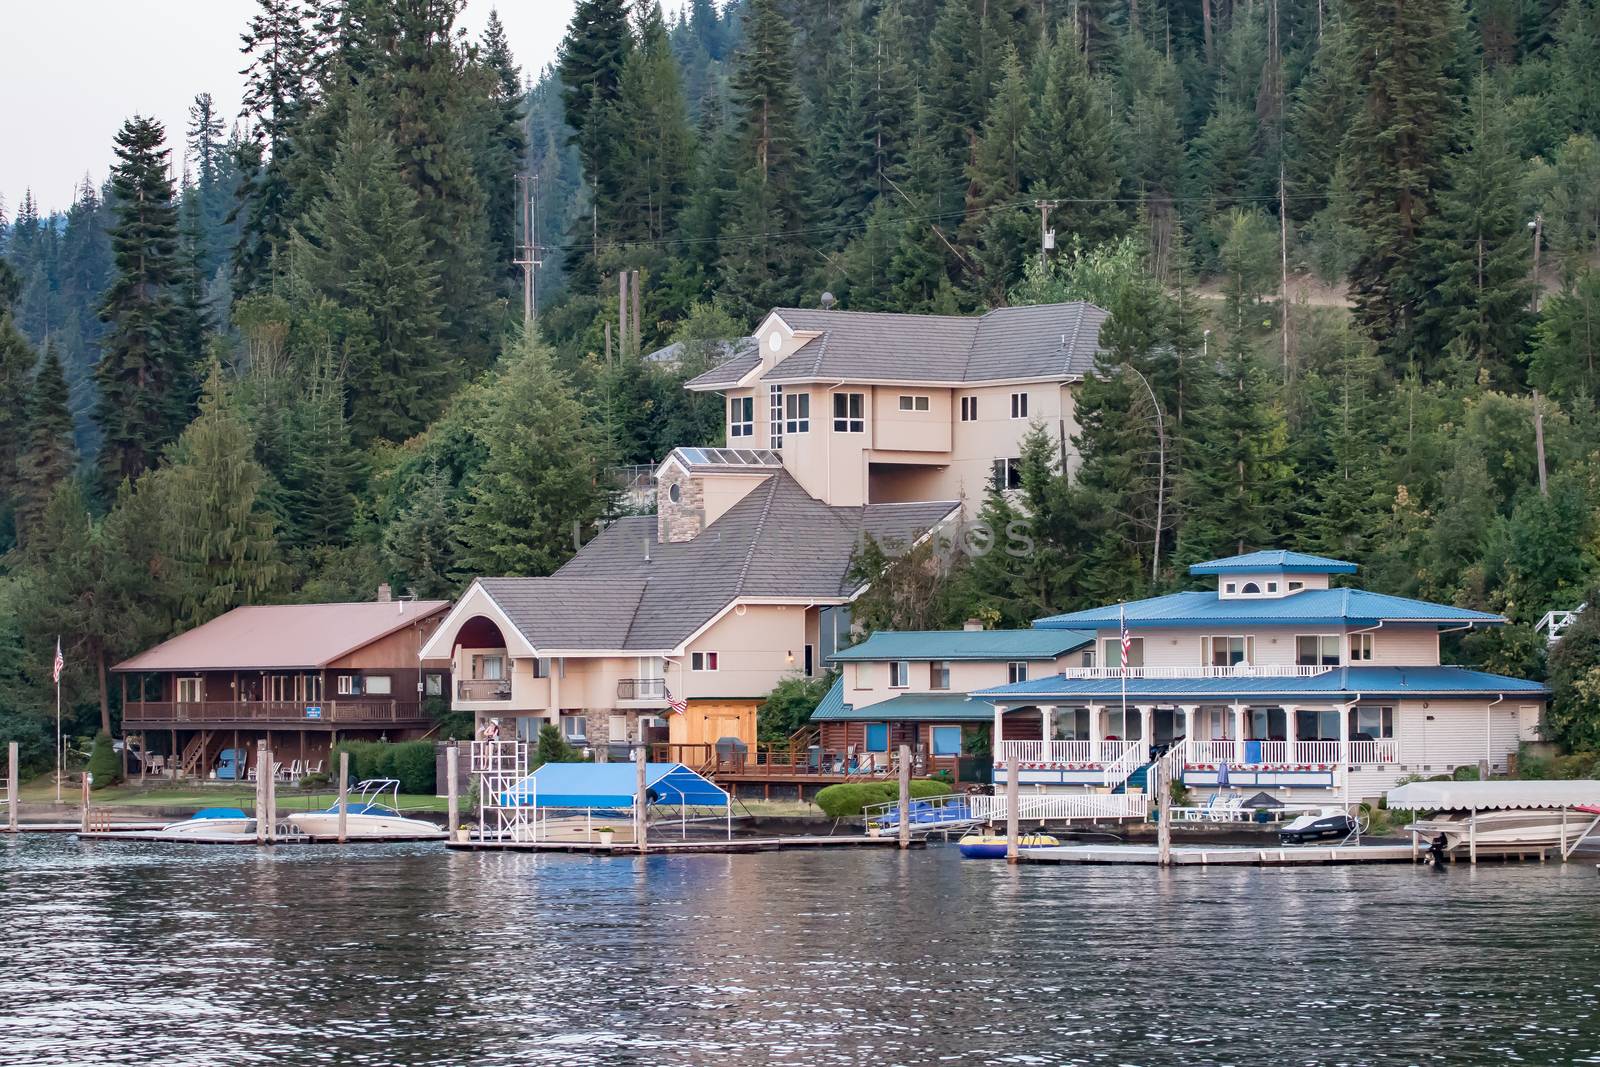 Coeur d'Alene, Idaho, USA-July 9, 2015: Homes and boat docks sit on the shores of Lake Coeur d'Alene as a mannequin guards the pier.